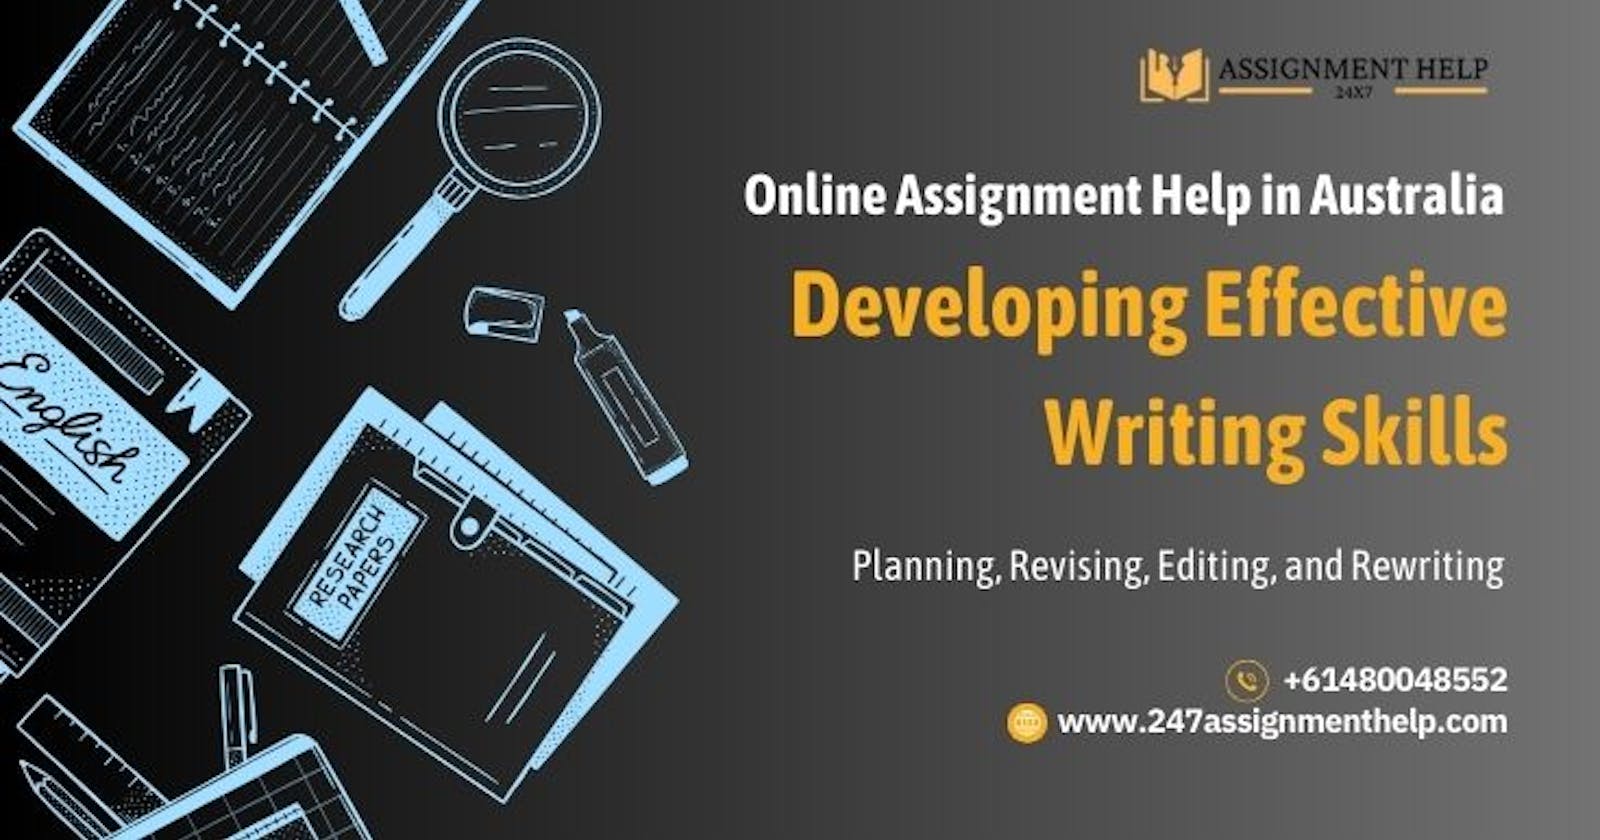 Need Assignment Help in Australia? WhatsApp us at +61489921023